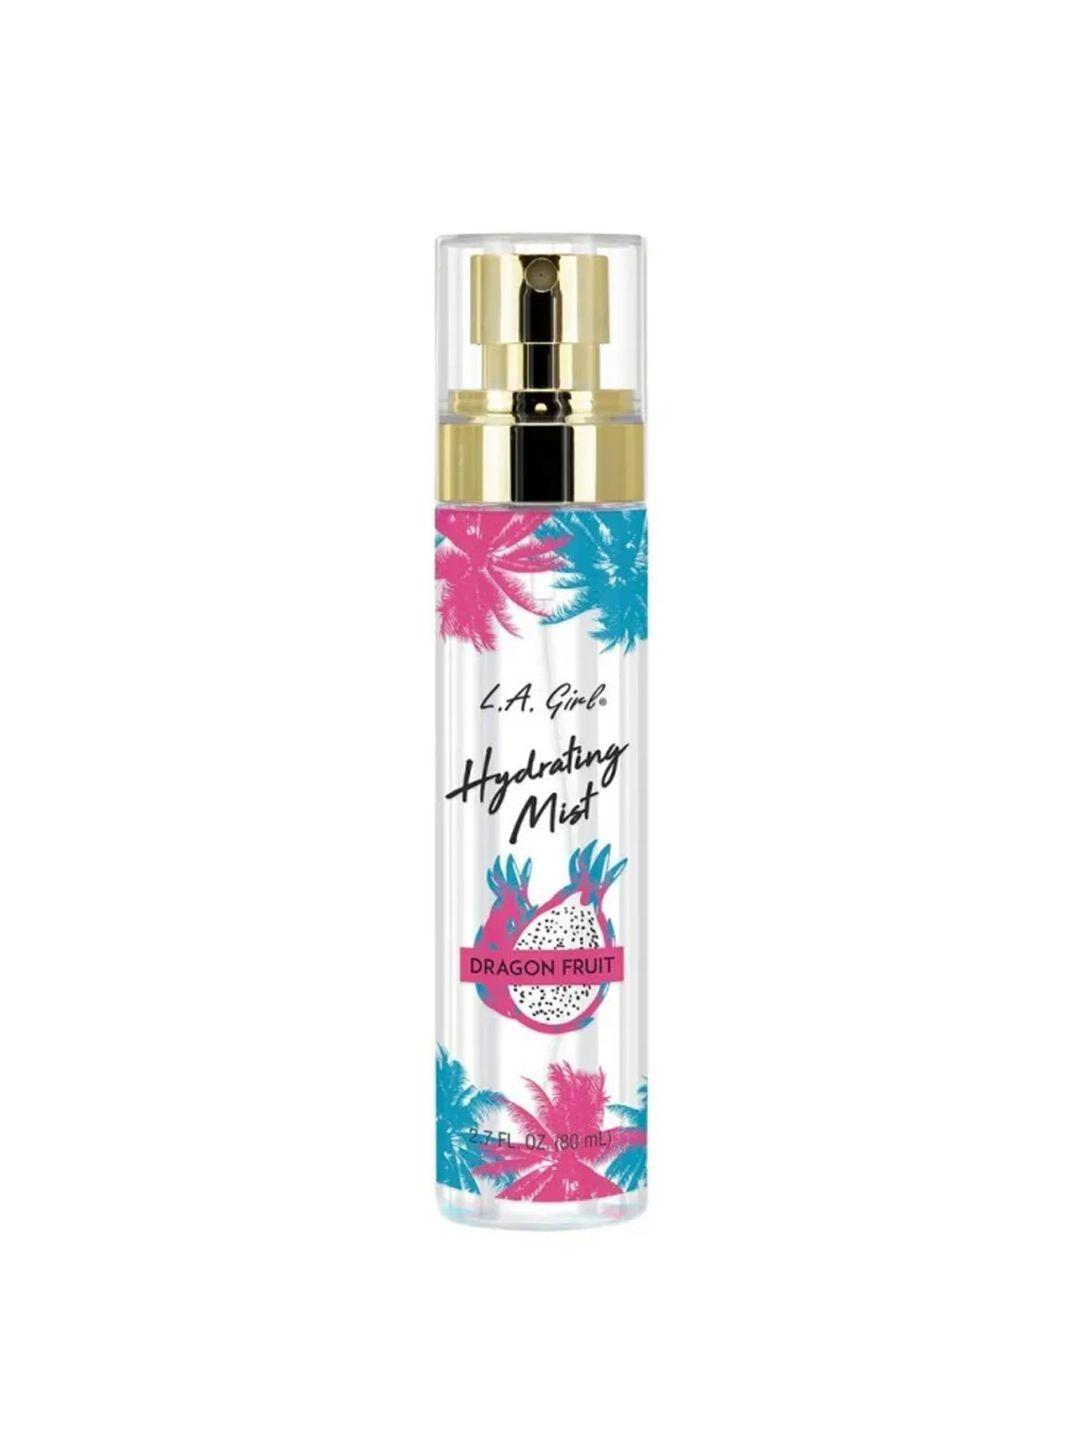 l.a girl lightweight hydrating face mist primer spray with rose water 80 ml - dragon fruit